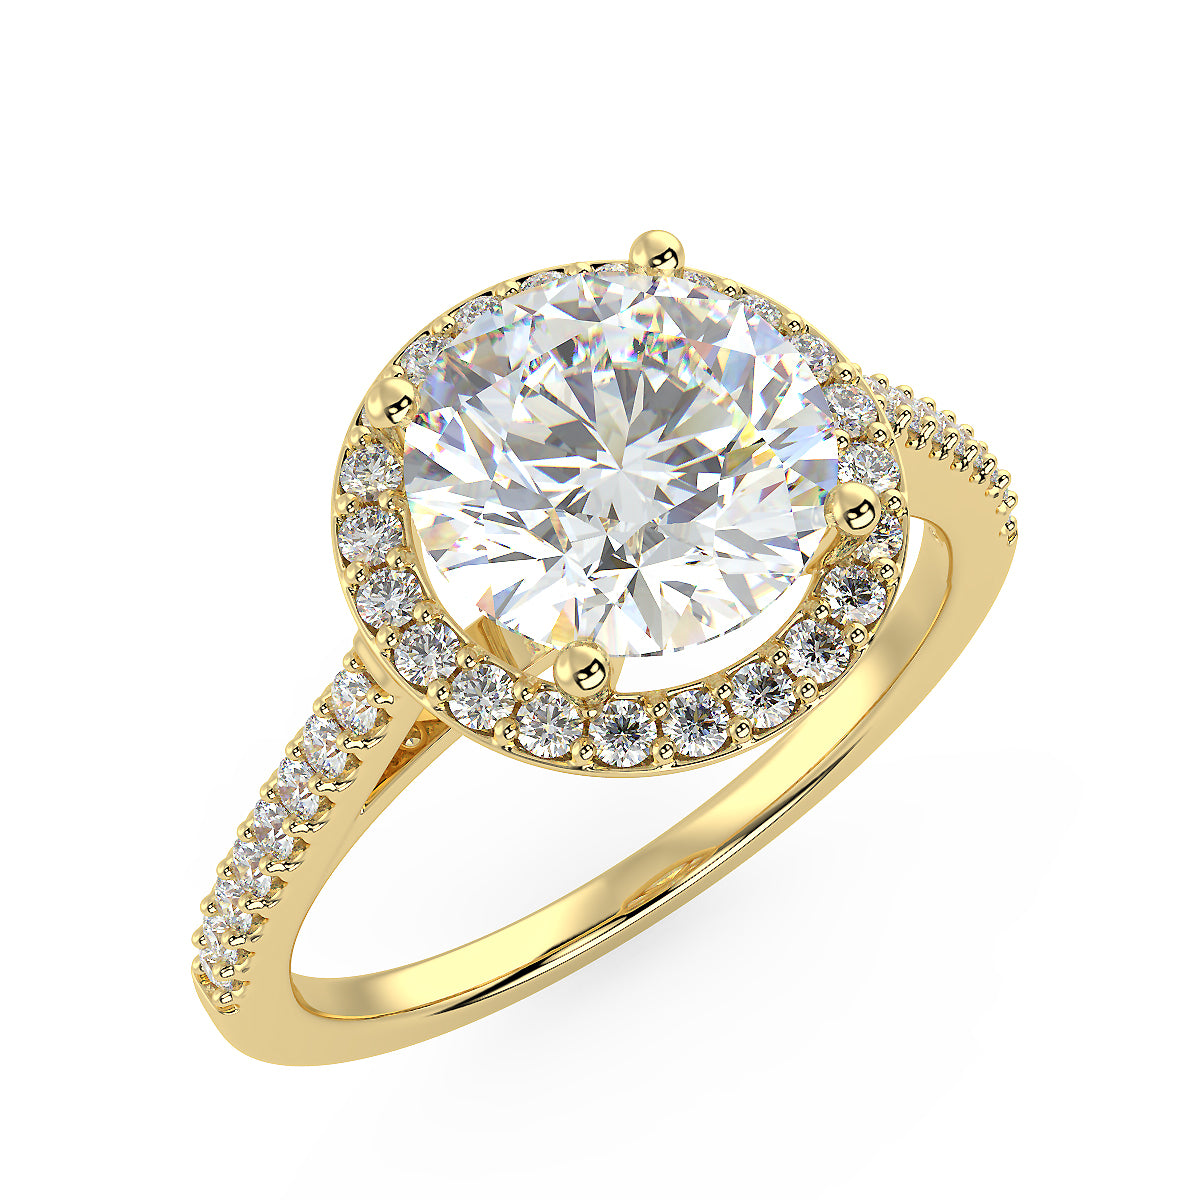 Carina Engagement Ring in Yellow Gold